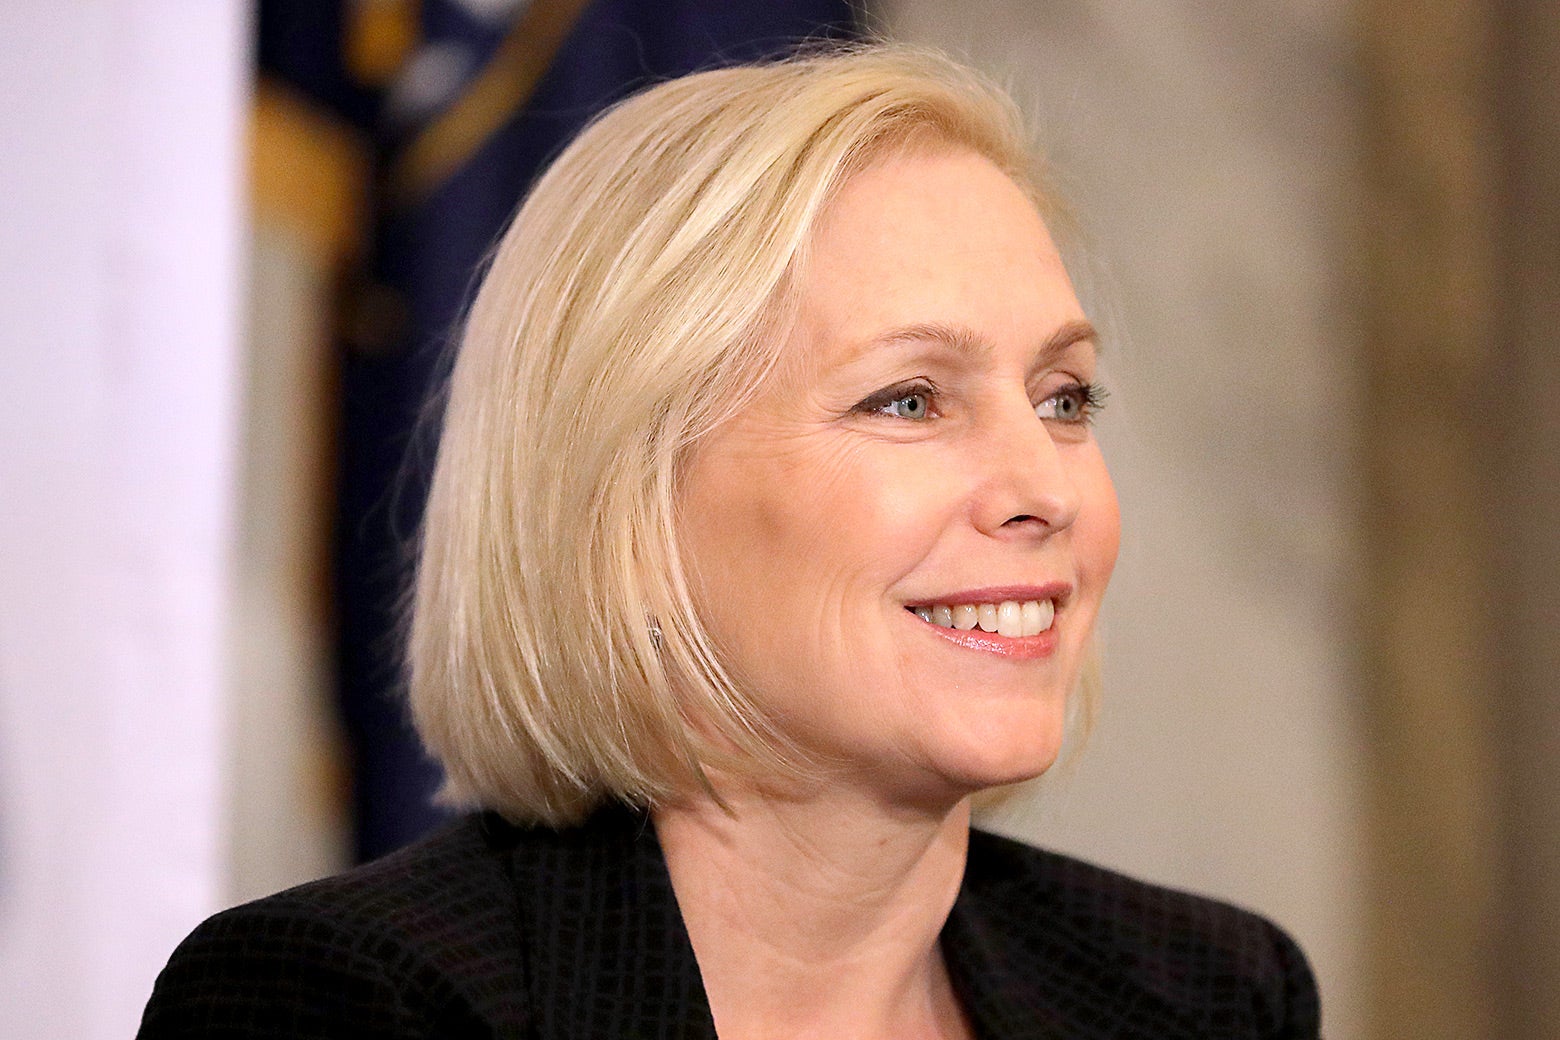 Sen. Kirsten Gillibrand attends a post-midterm election meeting of National Action Network on Nov. 14 in Washington.